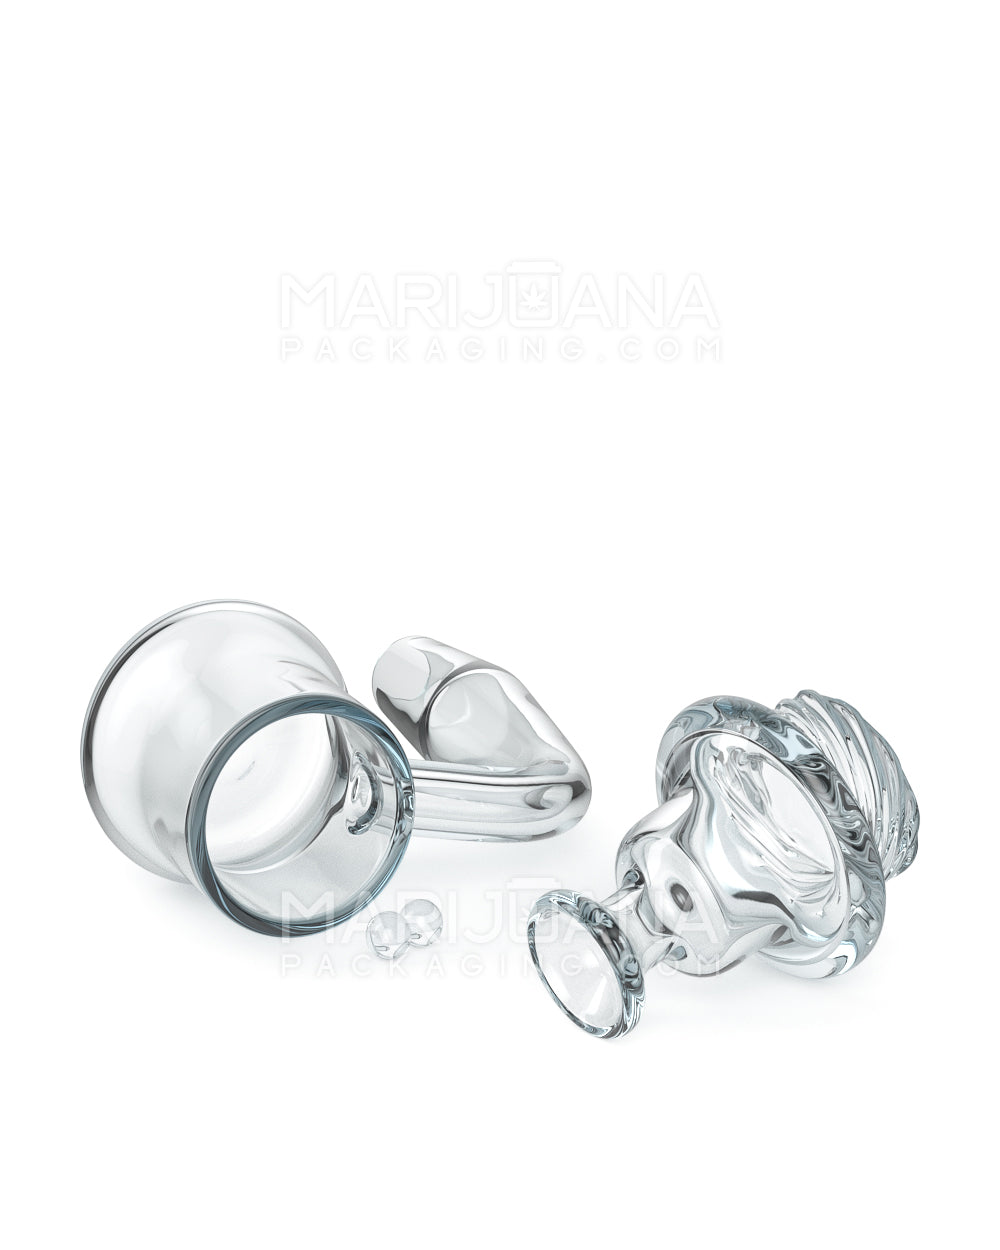 Thick 4mm Quartz Banger Kit w/ Bell Spinner Carb Cap & 2 Pearls | 14mm - 90 Degree - Male - 6